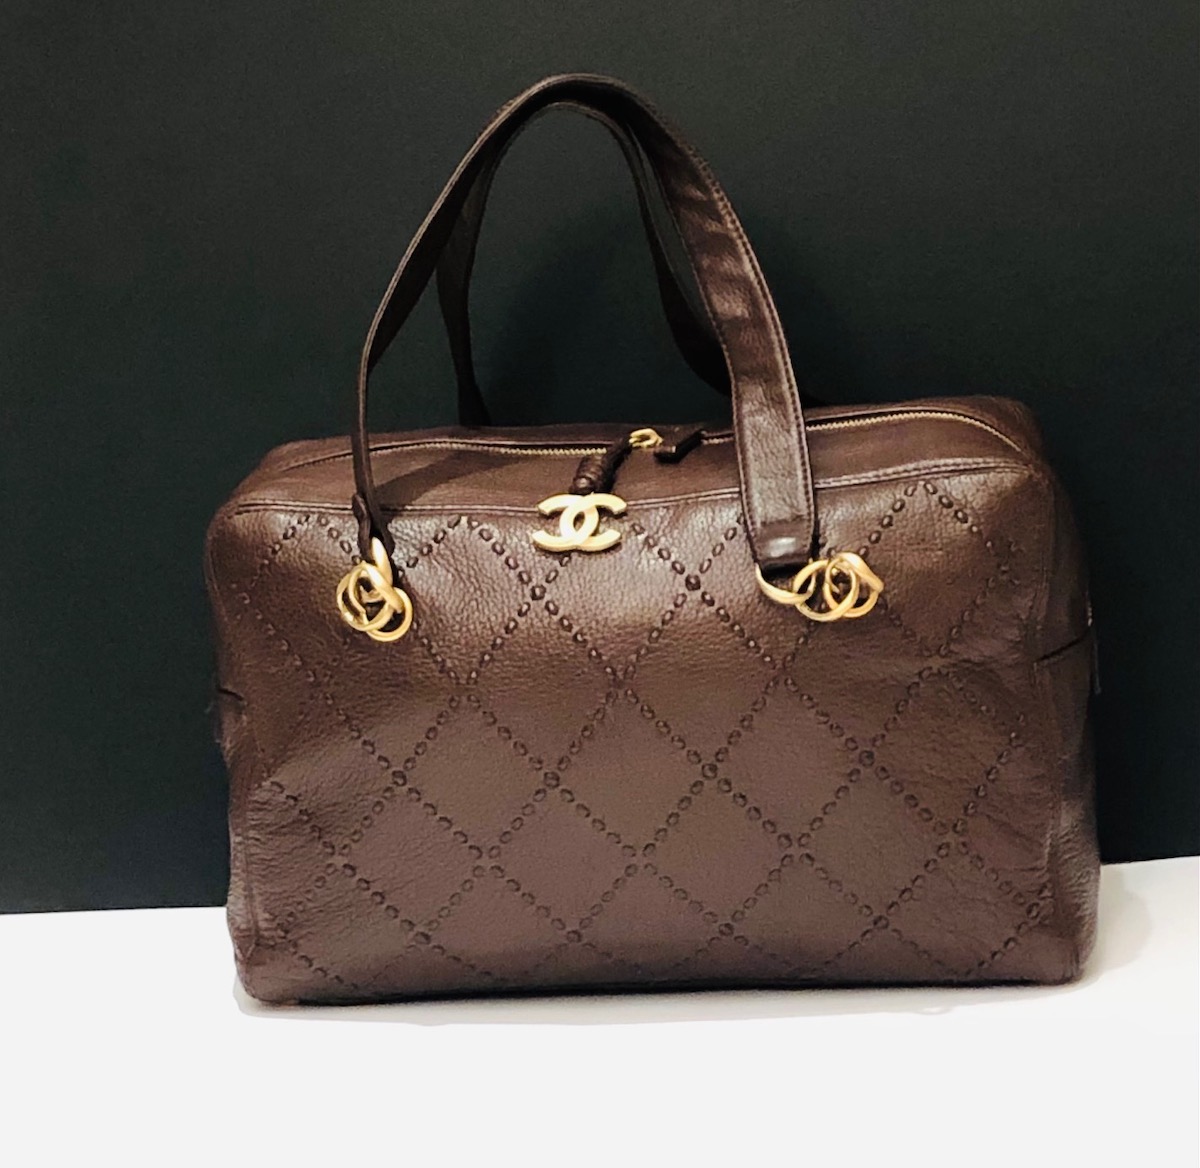 CHANEL Handbag Timeless Chanel Leather Quilted CC Tote - Chelsea